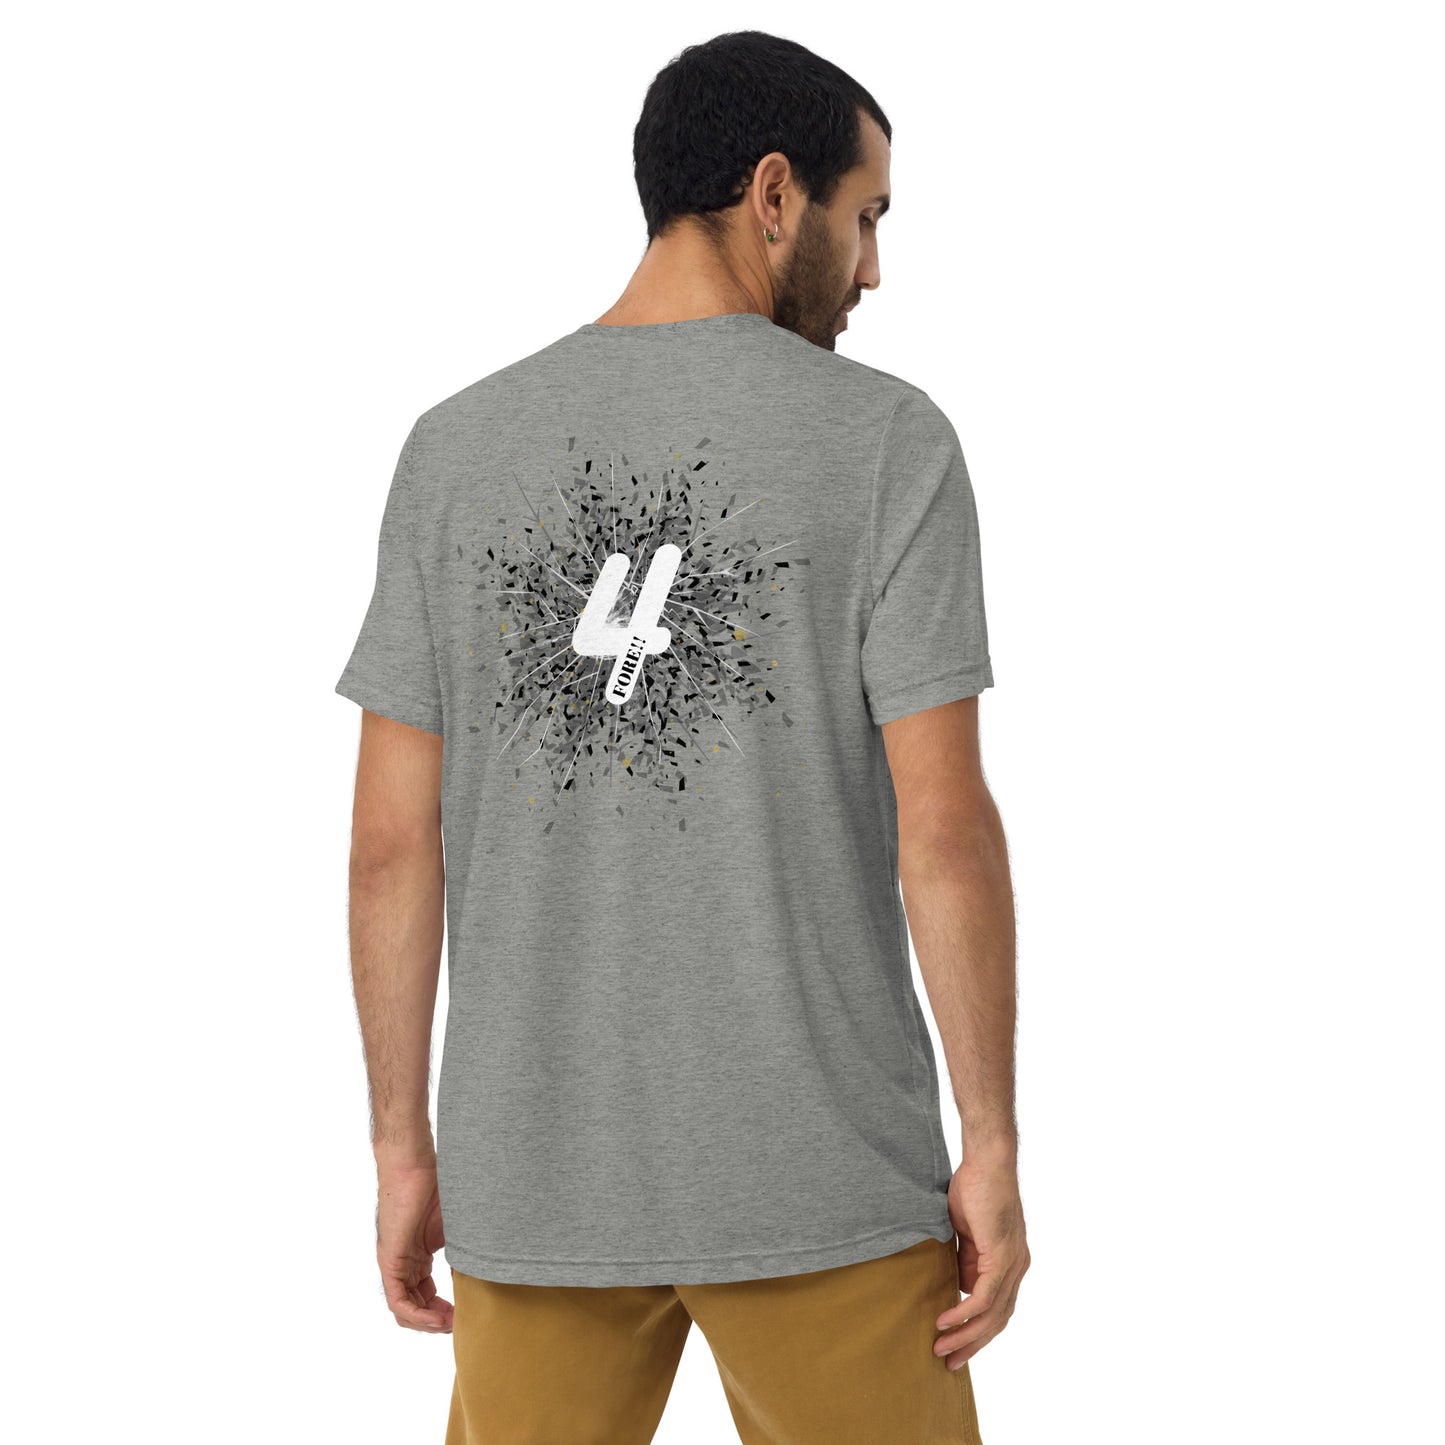 Shattered FORE! T-shirt